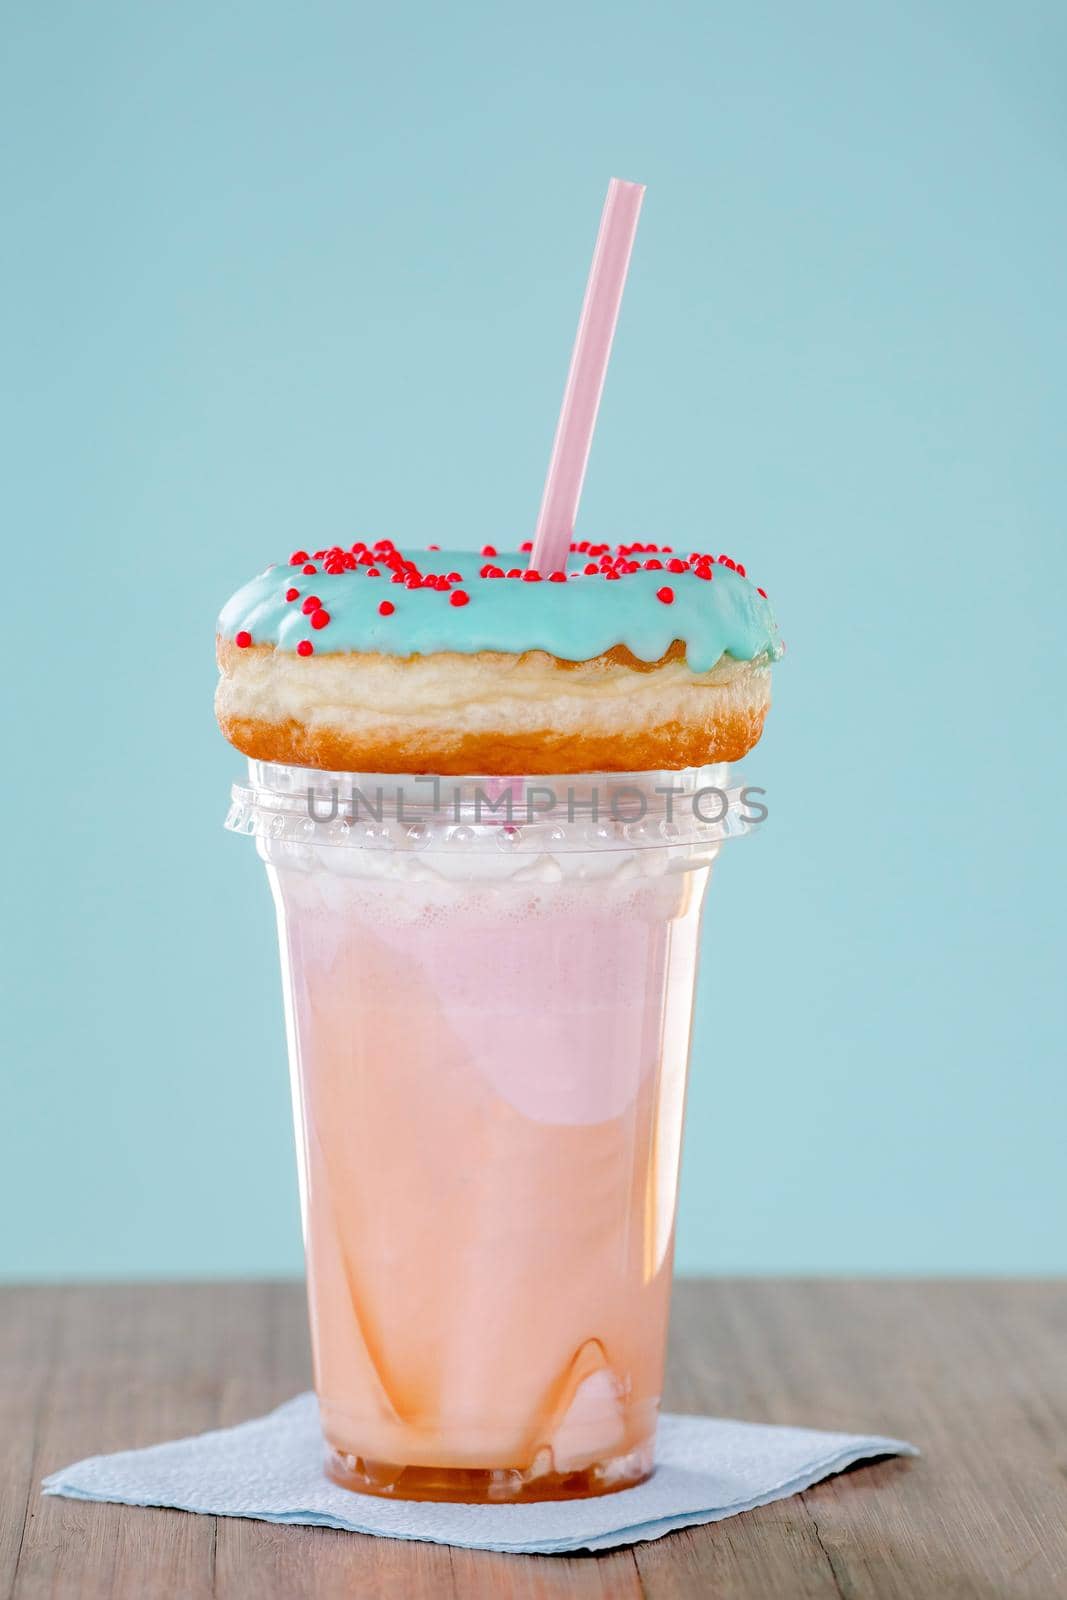 Pink and donuts extreme milkshakein a plastic cup on blue background. Crazy freakshake or overshake on wooden table with copy space